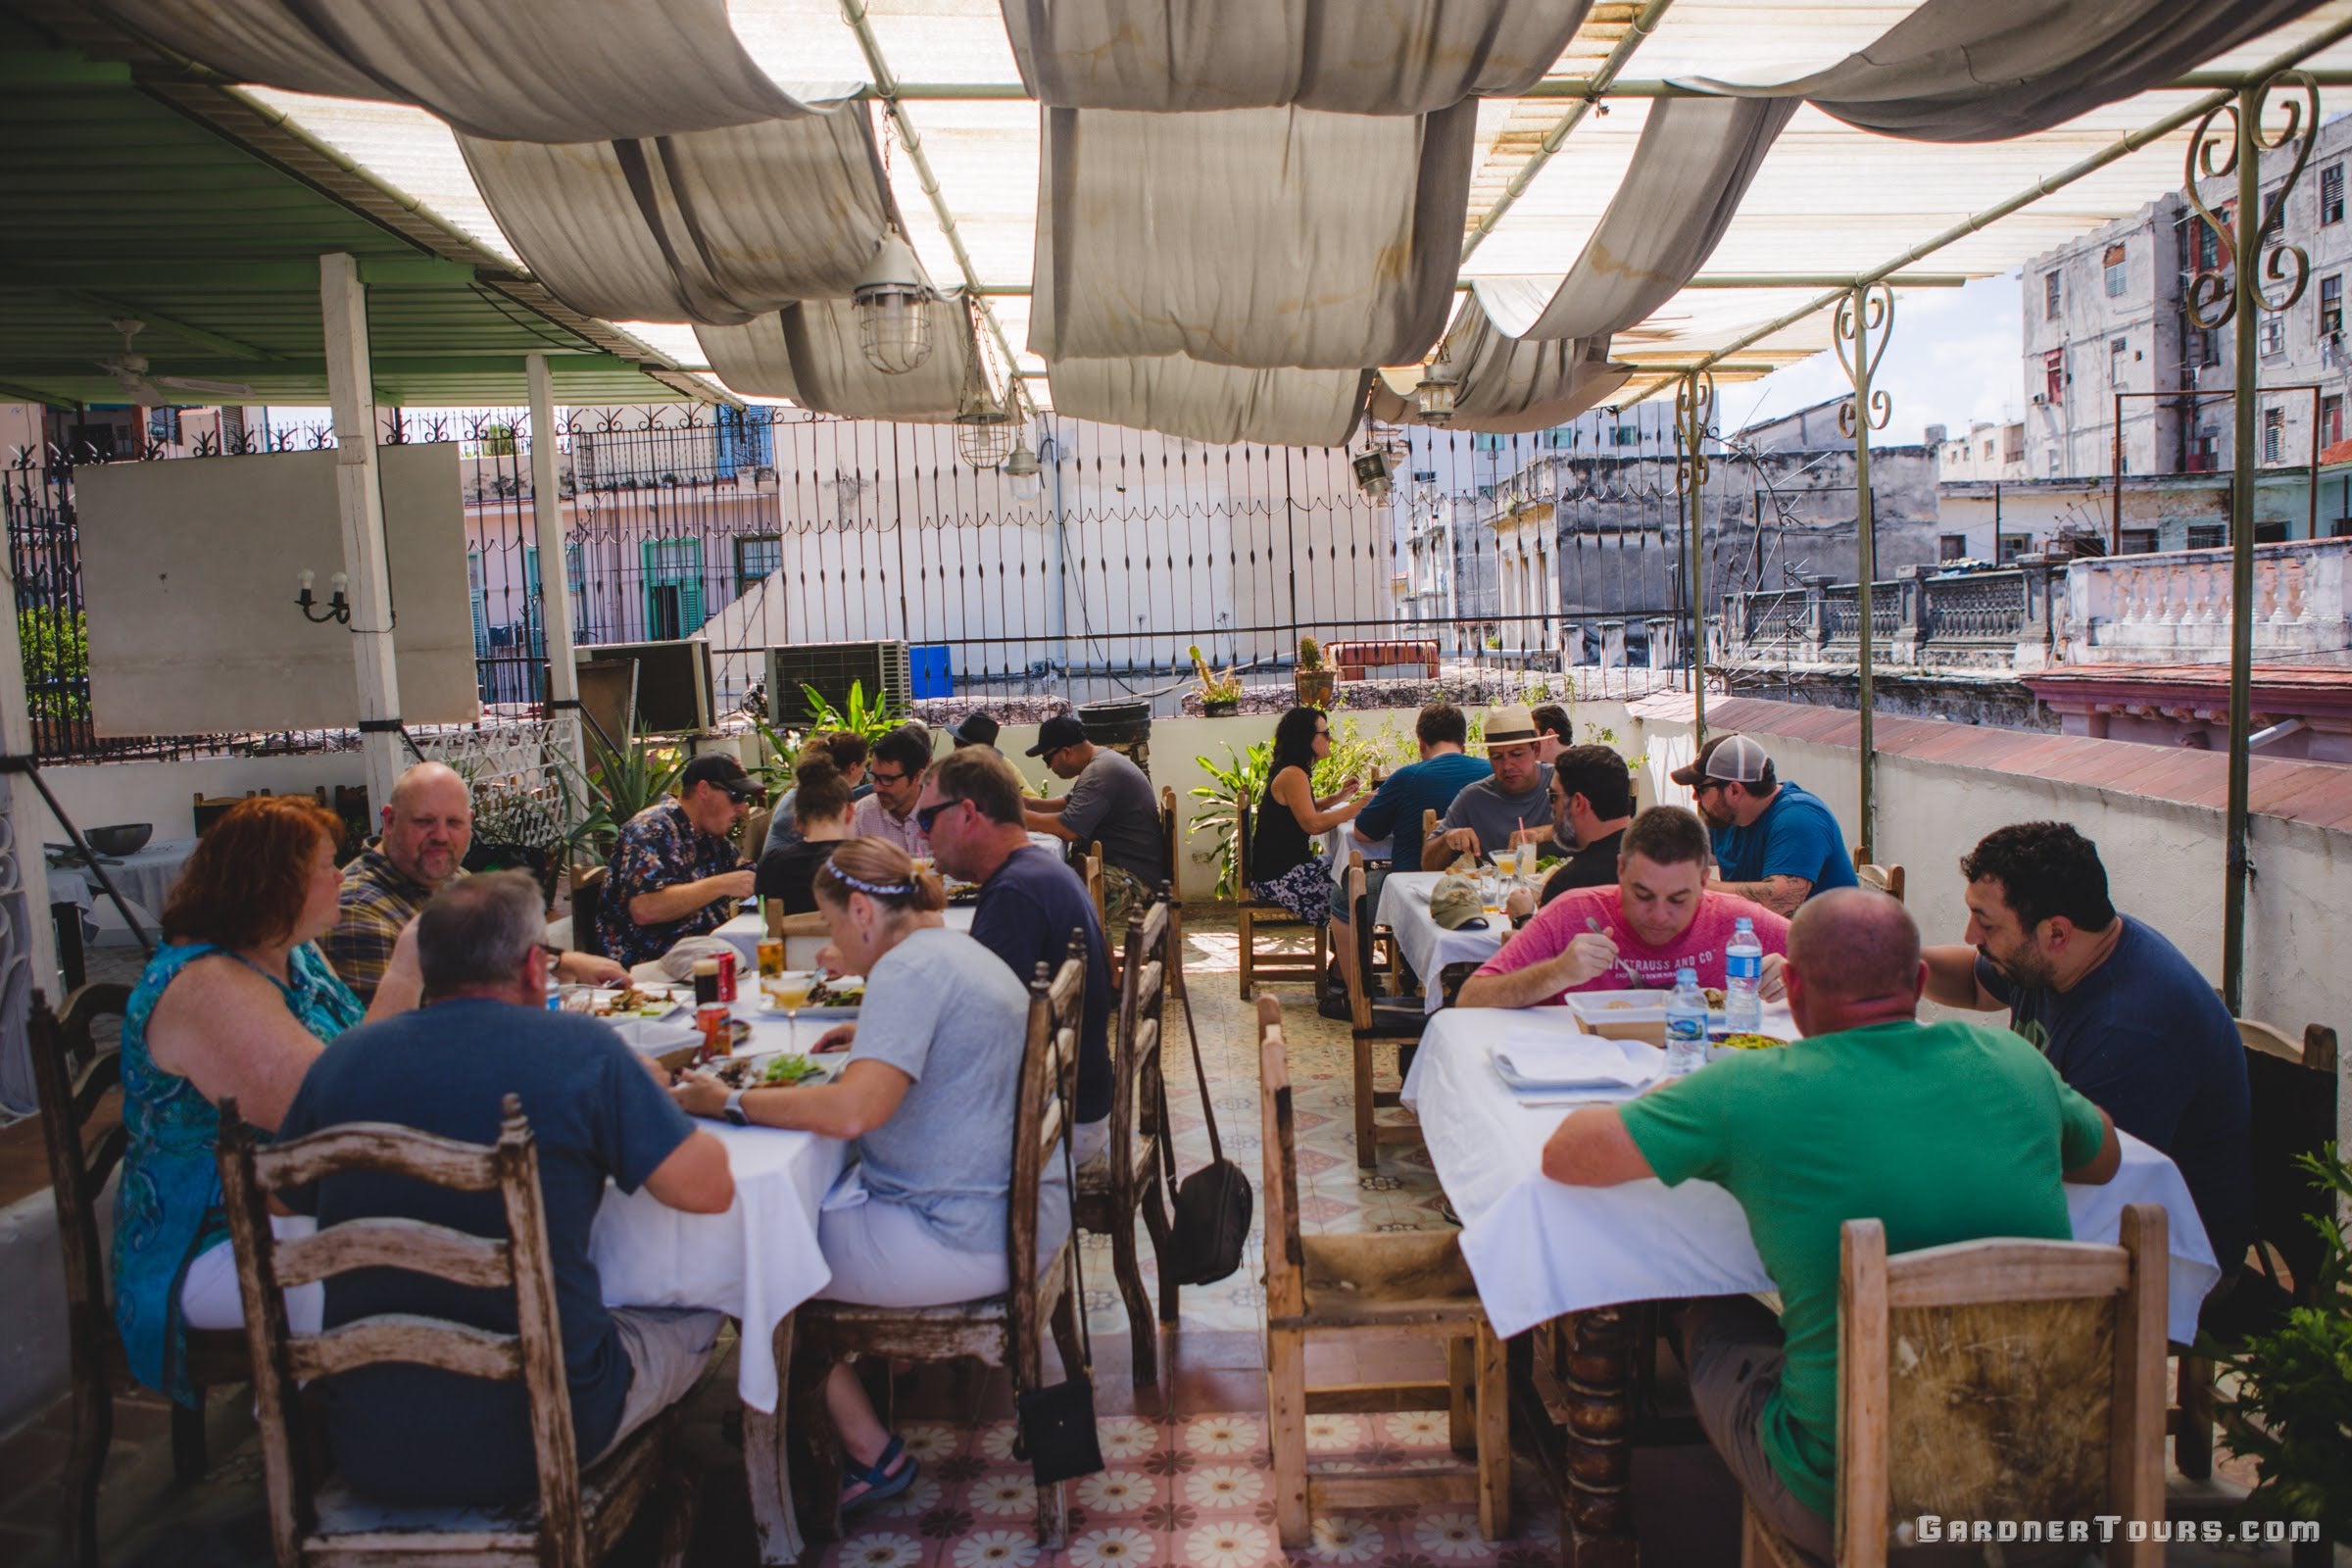 A large Group of friends eating Lunch on a Rooftop at a Restaurant Paladar in Old Havana, Cuba